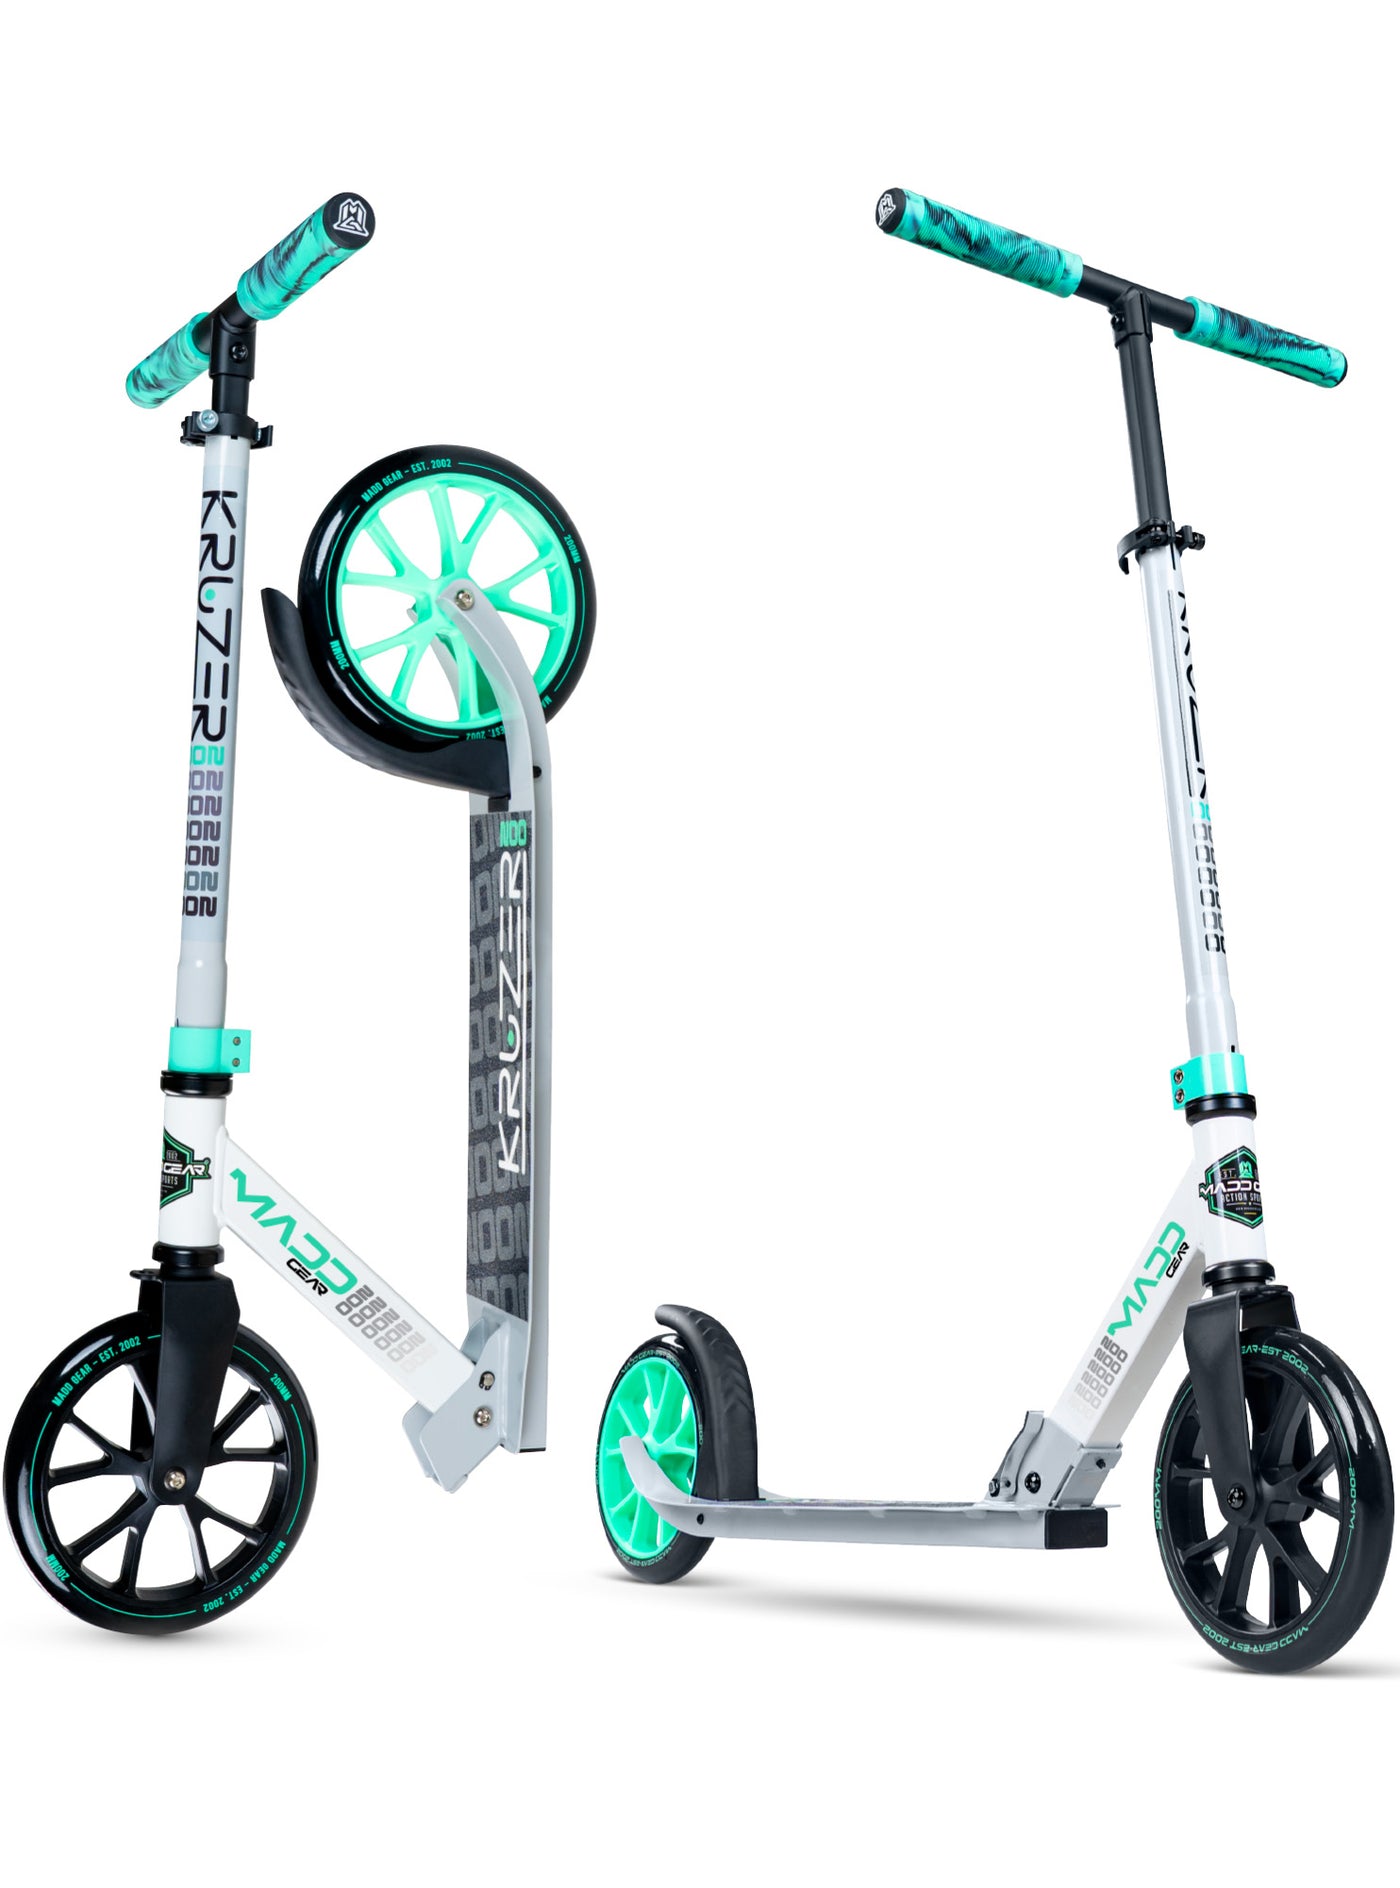 MG Kruzer 200 Folding Commuter Scooter in White Gray Teal – Stylish design, perfect for urban commuting and leisure rides